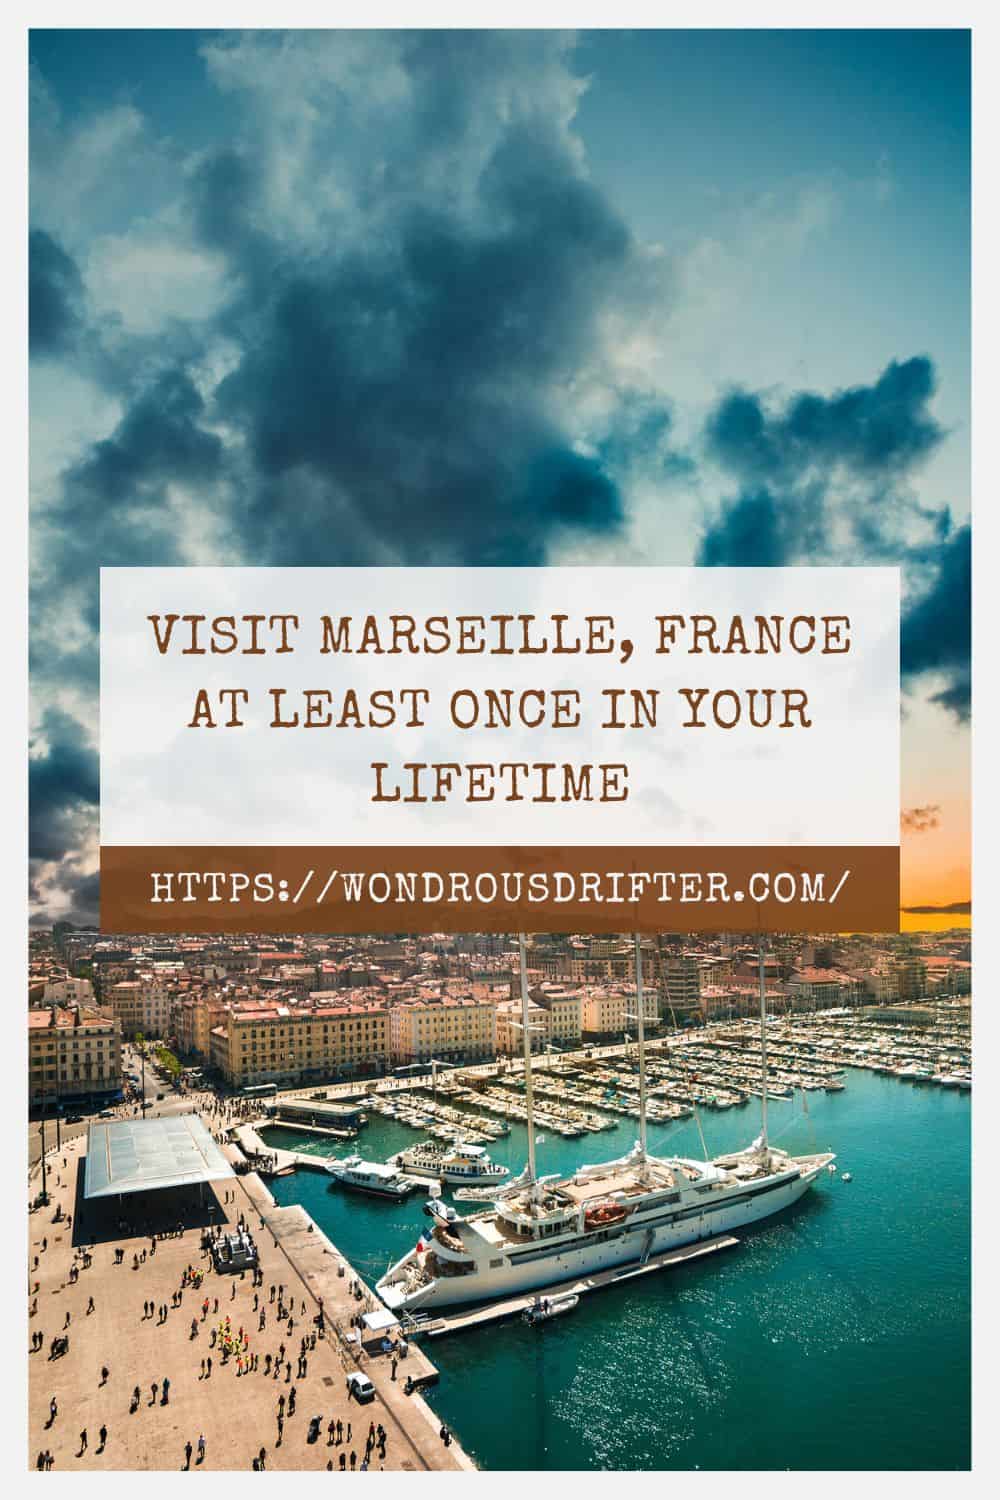 Visit Marseille France at least once in your lifetime